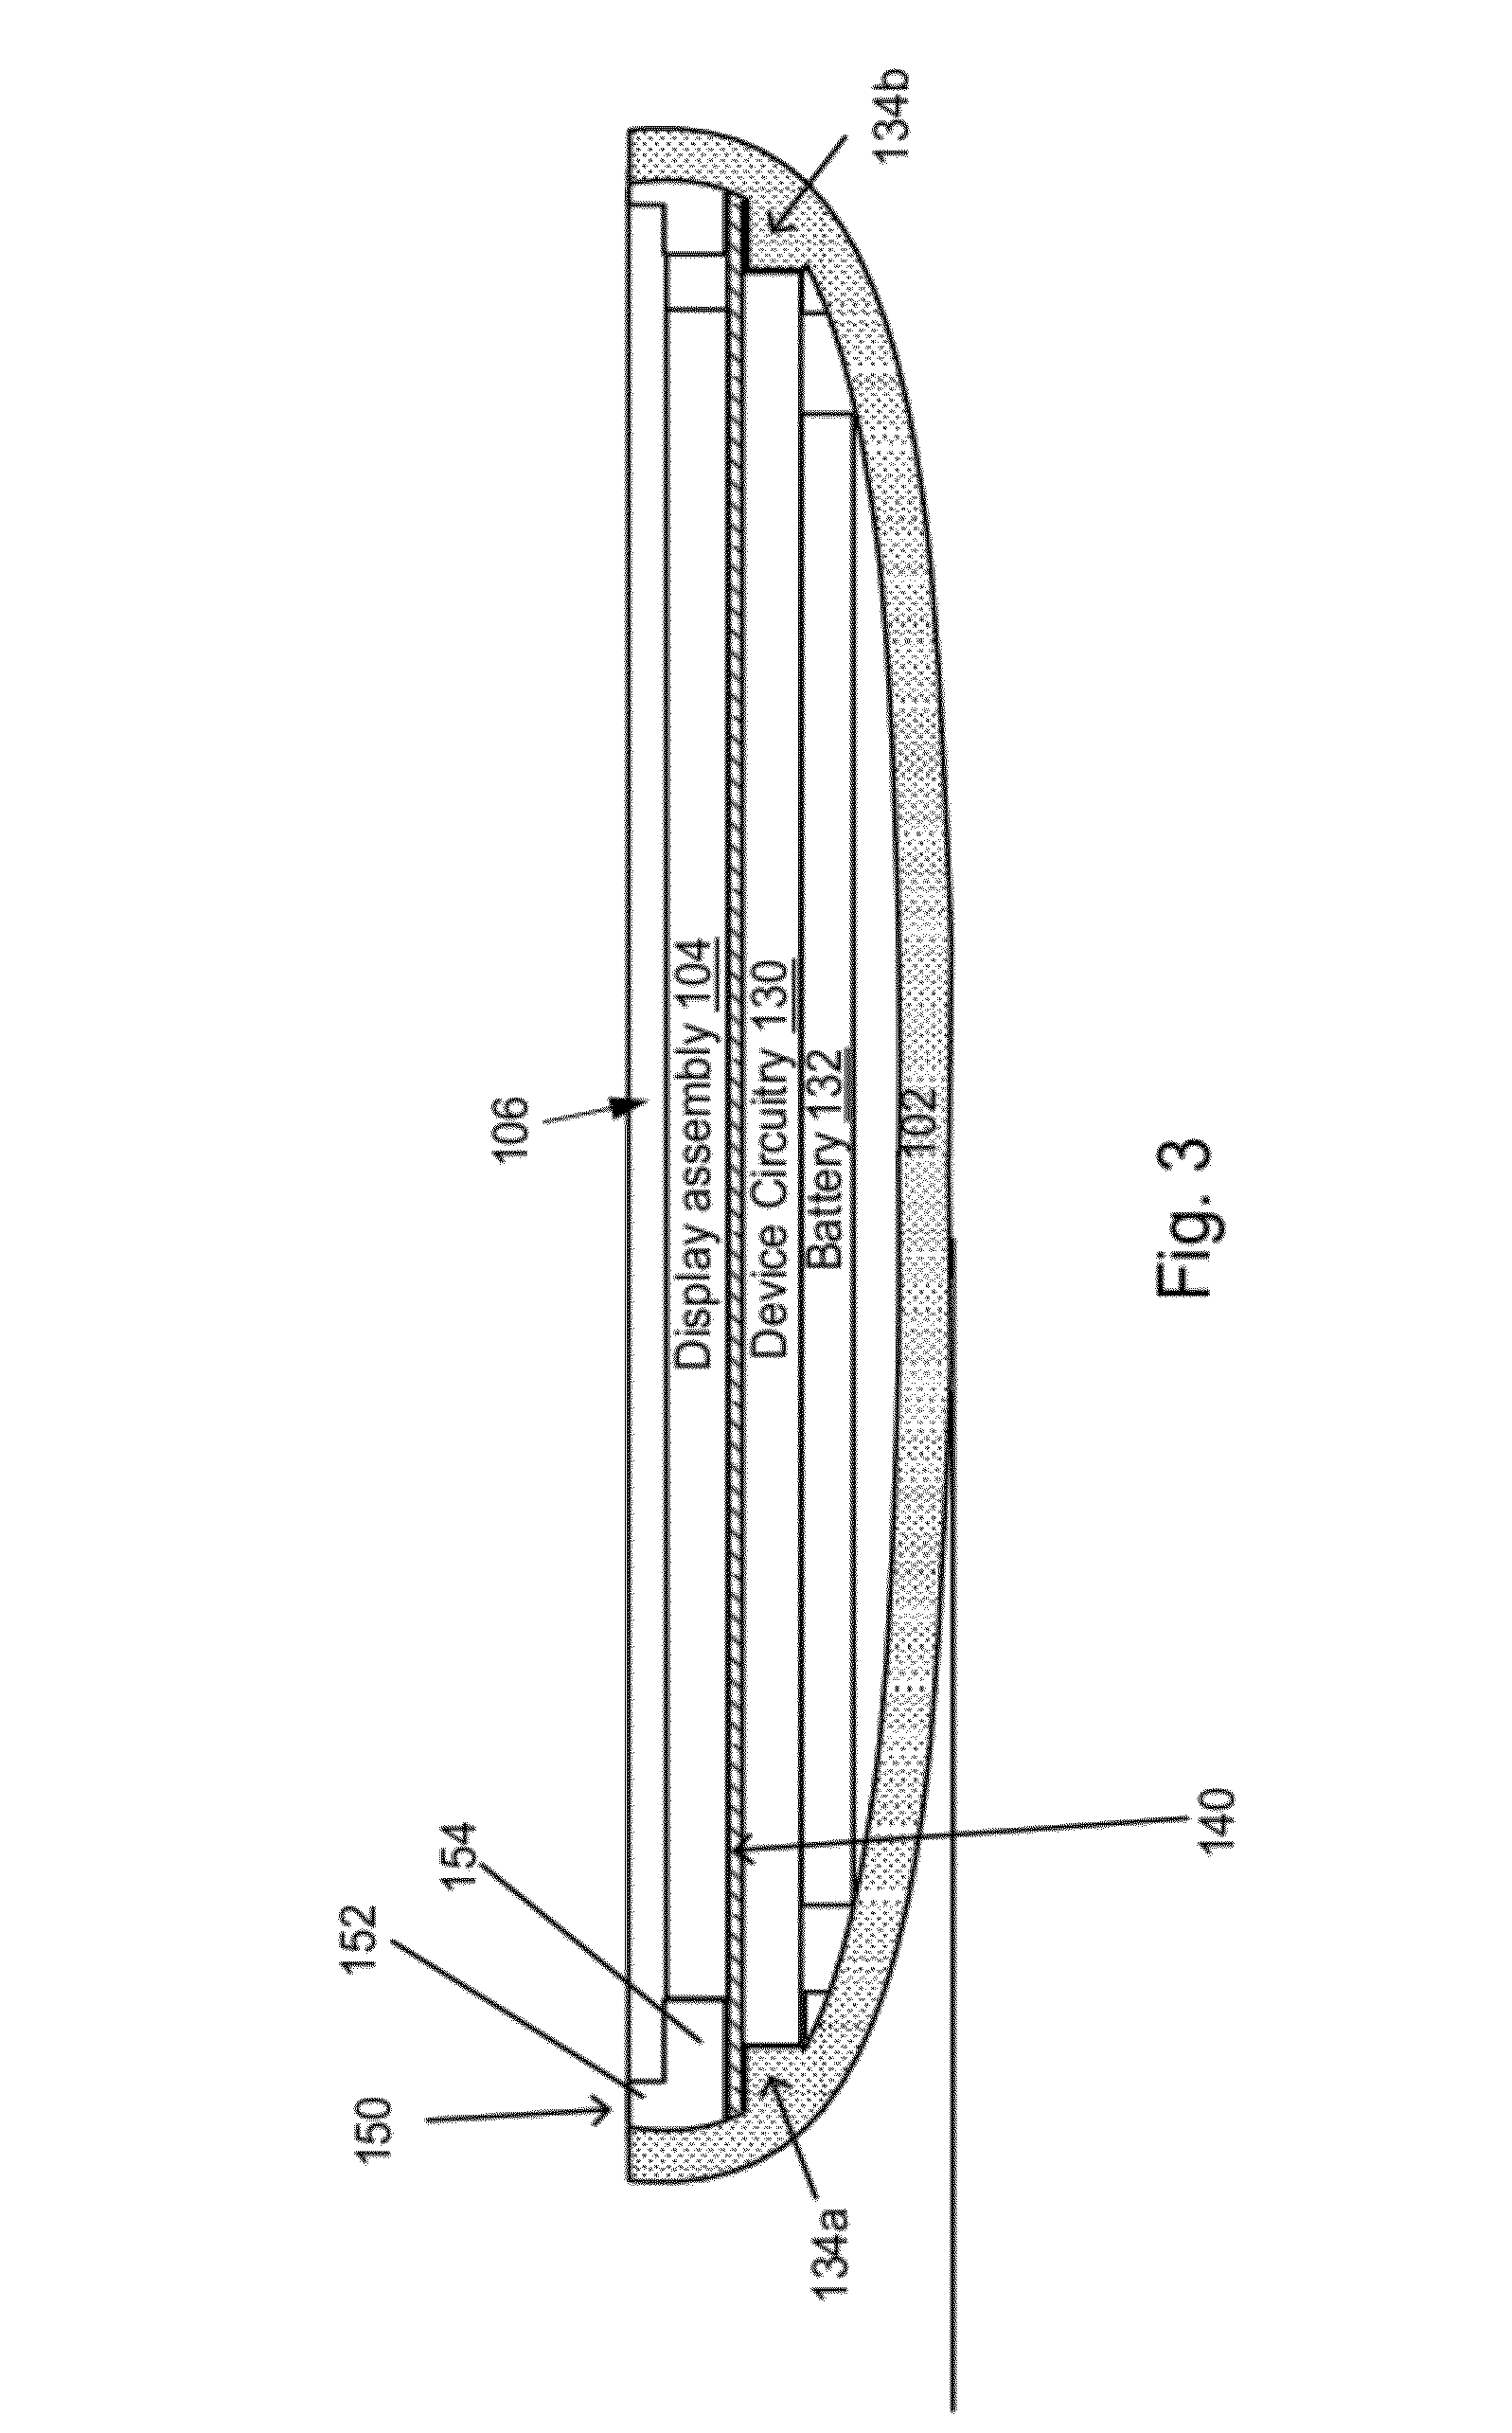 Porting audio using a connector in a small form factor electronic device